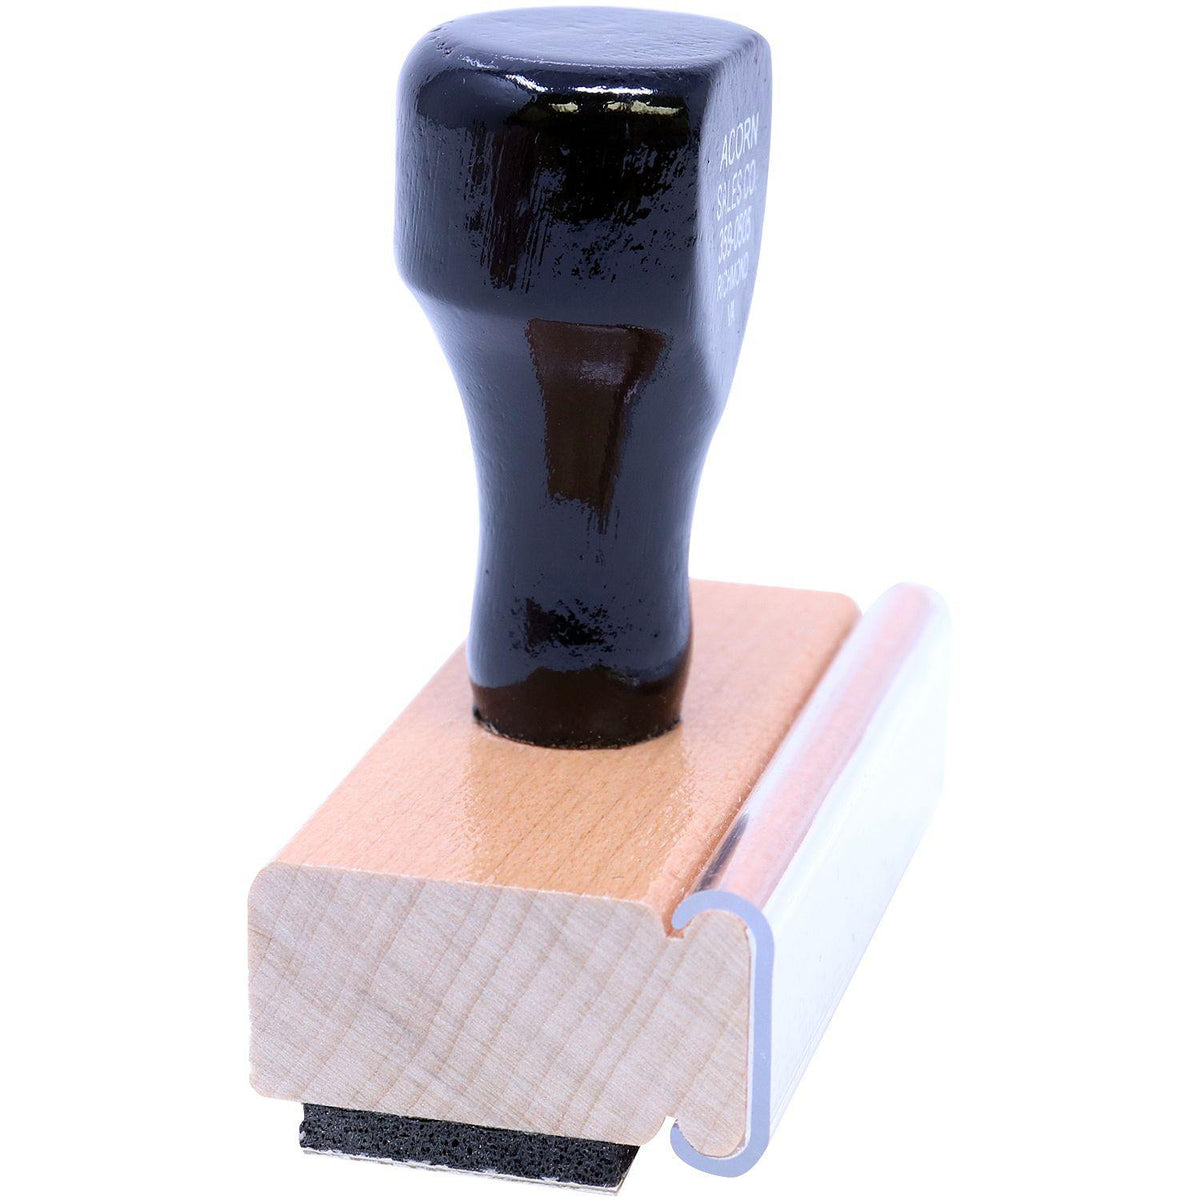 Side View of Large Capitation Rubber Stamp at an Angle